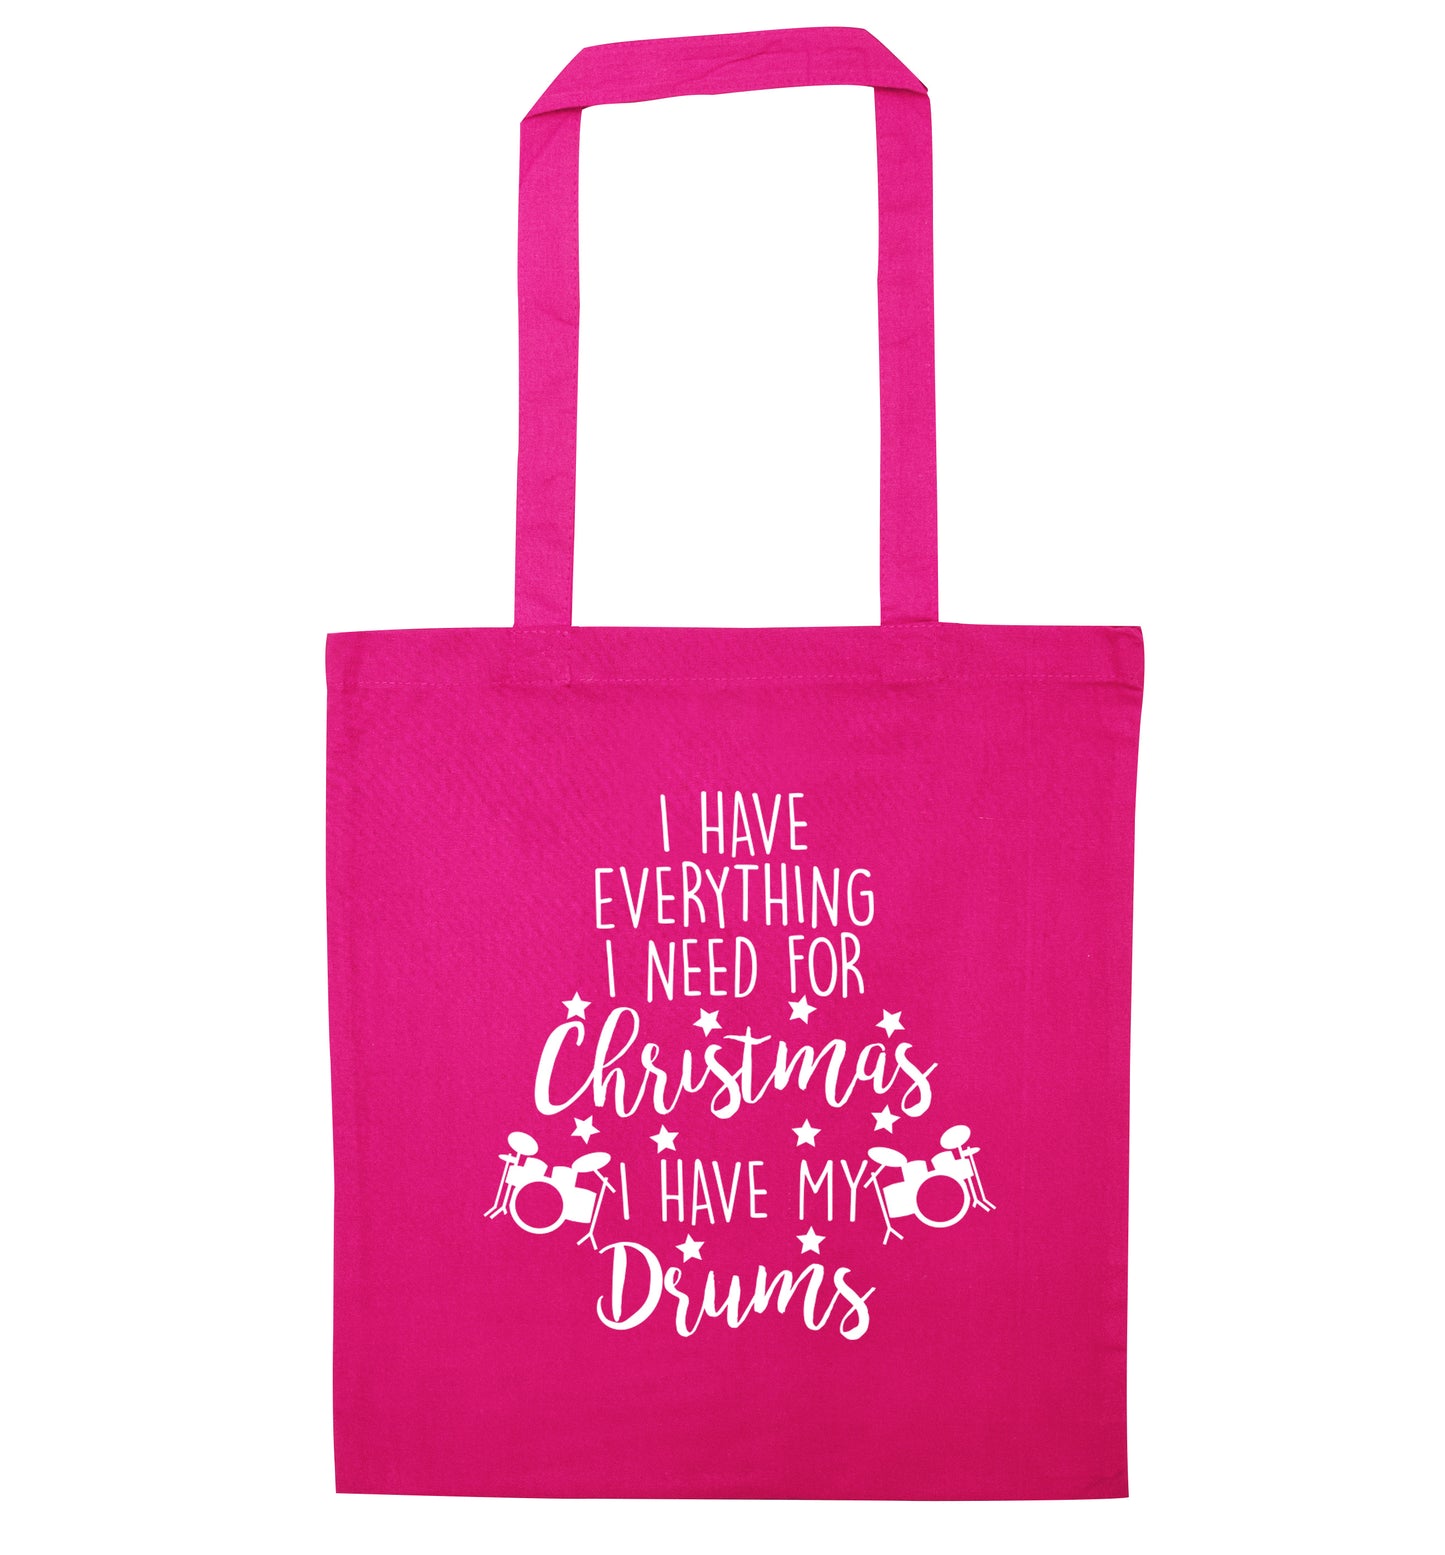 I have everything I need for Christmas I have my drums! pink tote bag